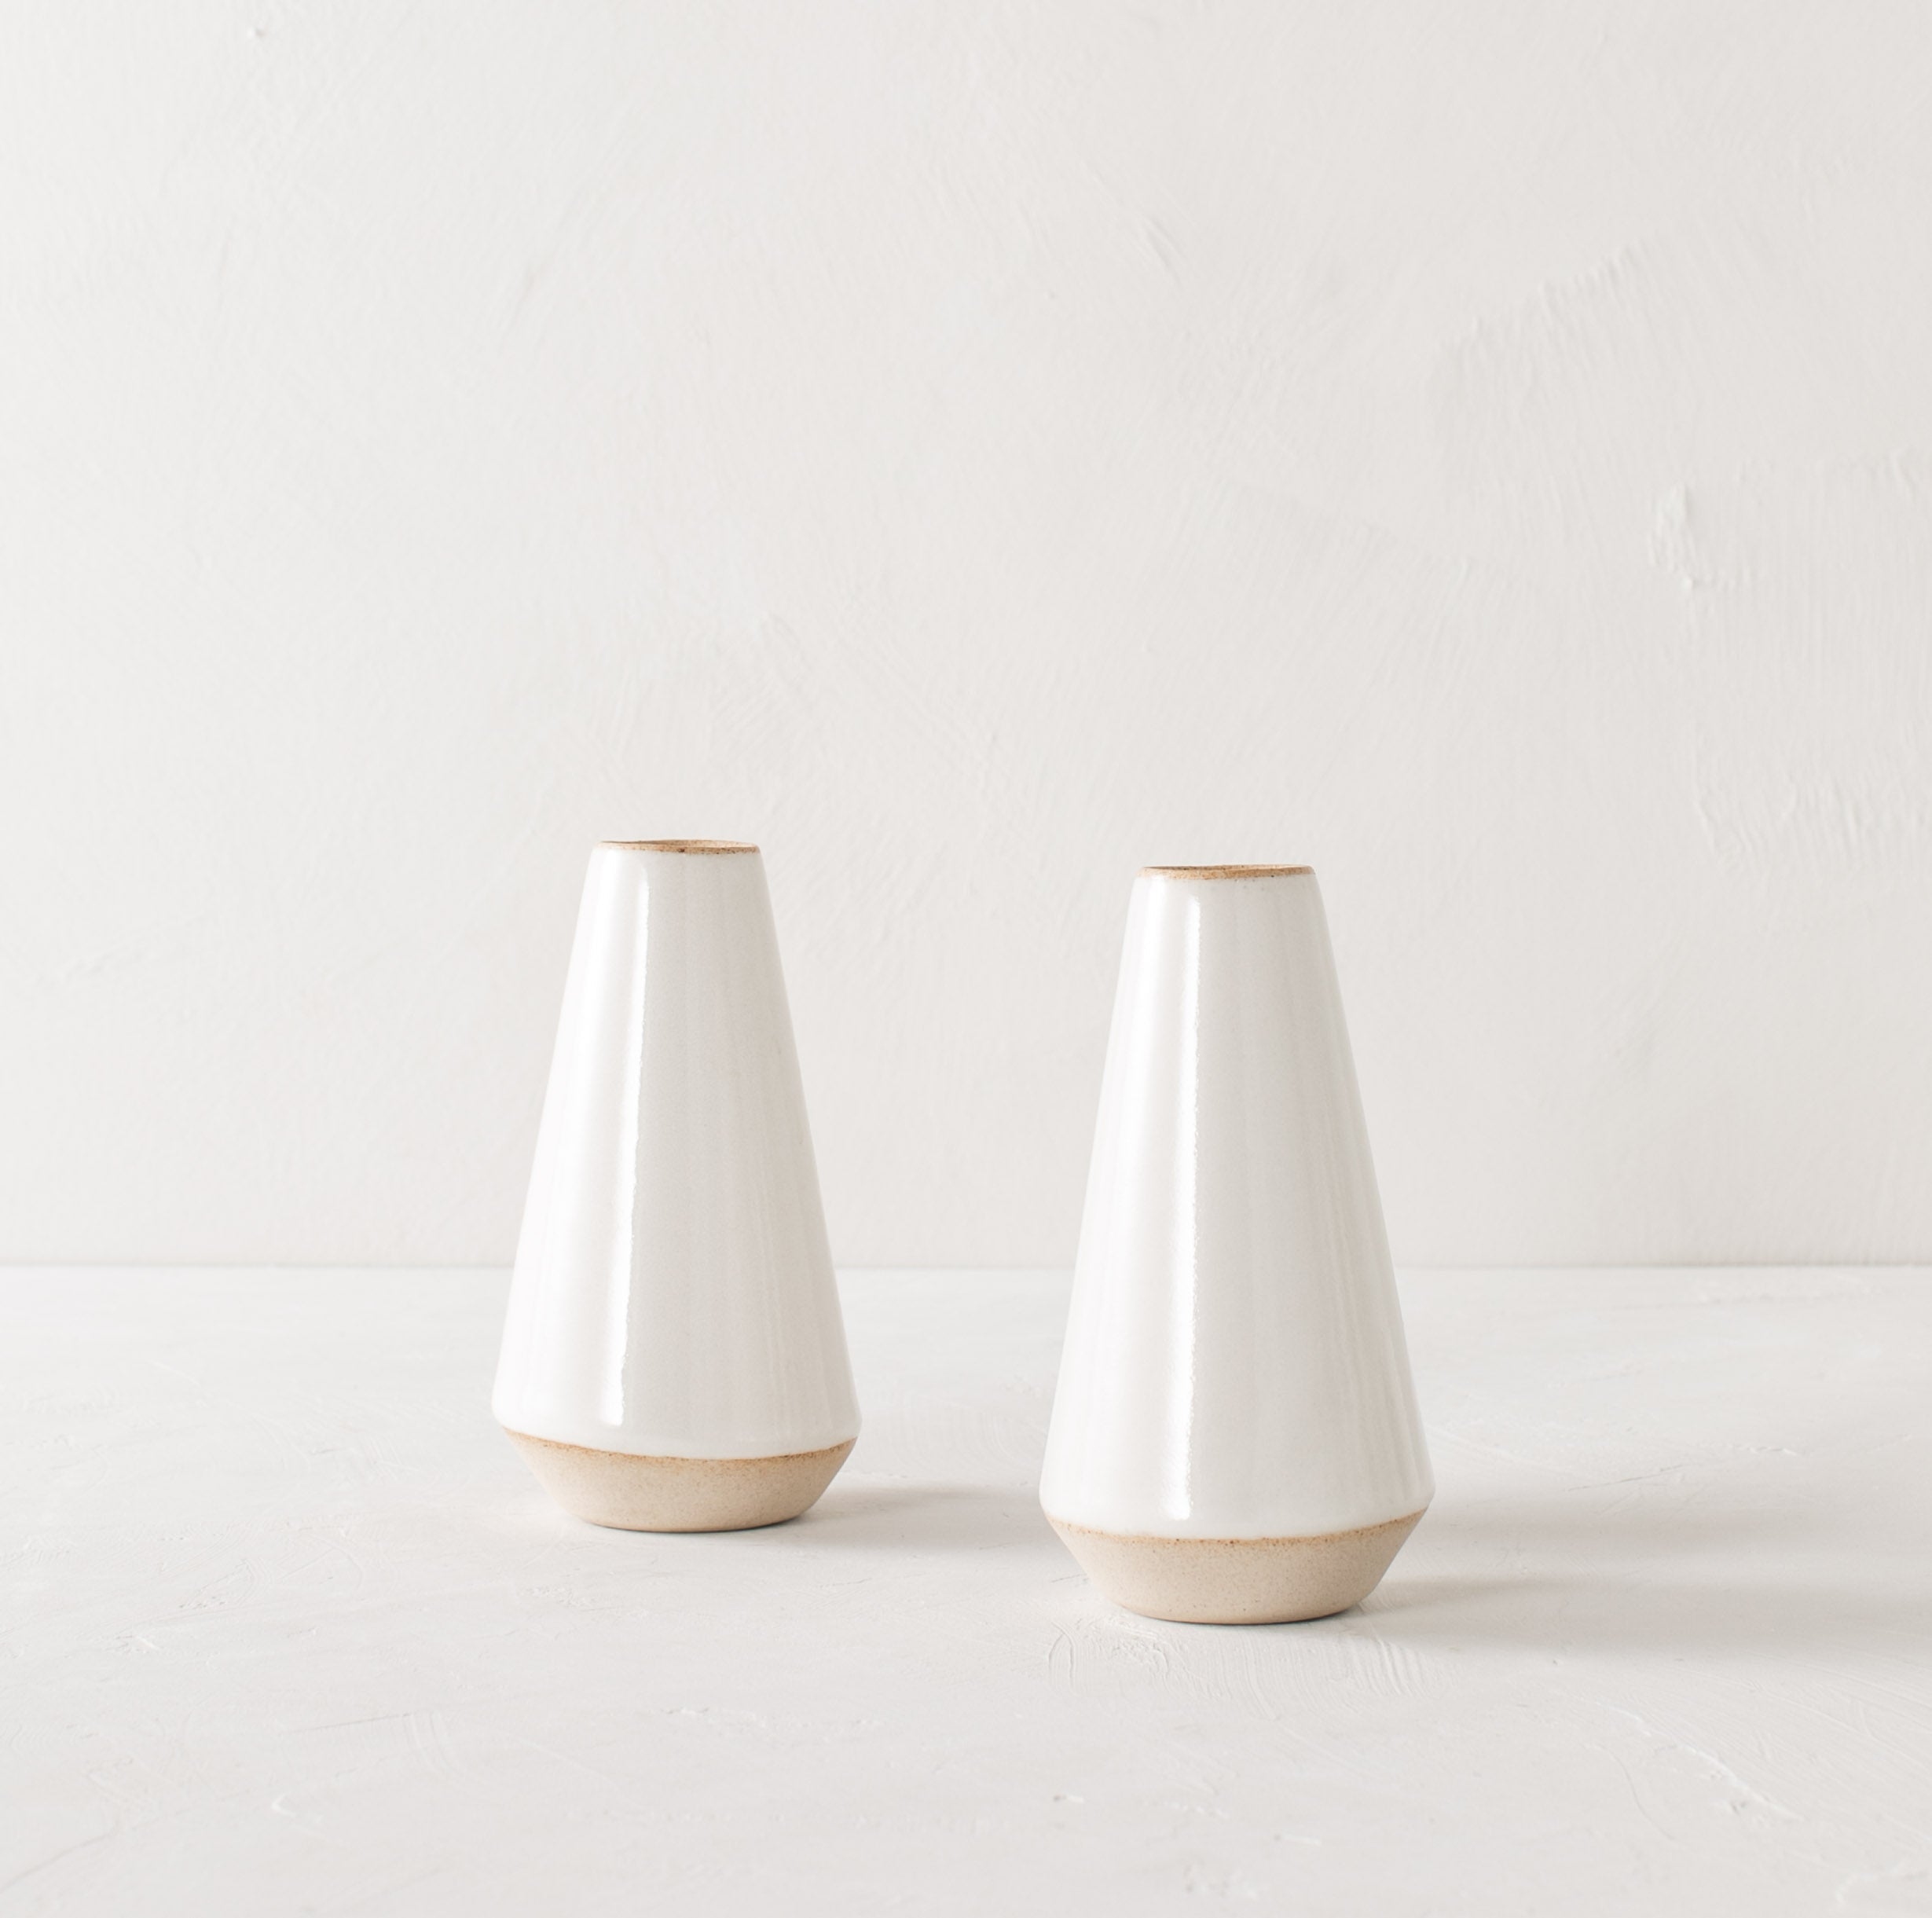 Two minimal white 7 inch tapered bud vase. White glazed with an exposes stoneware rim and base. Both upright side by side on a white plaster textured tabletop and white textured back drop. Handmade ceramic bud vase designed and sold by Convivial Production, Kansas City Ceramics.